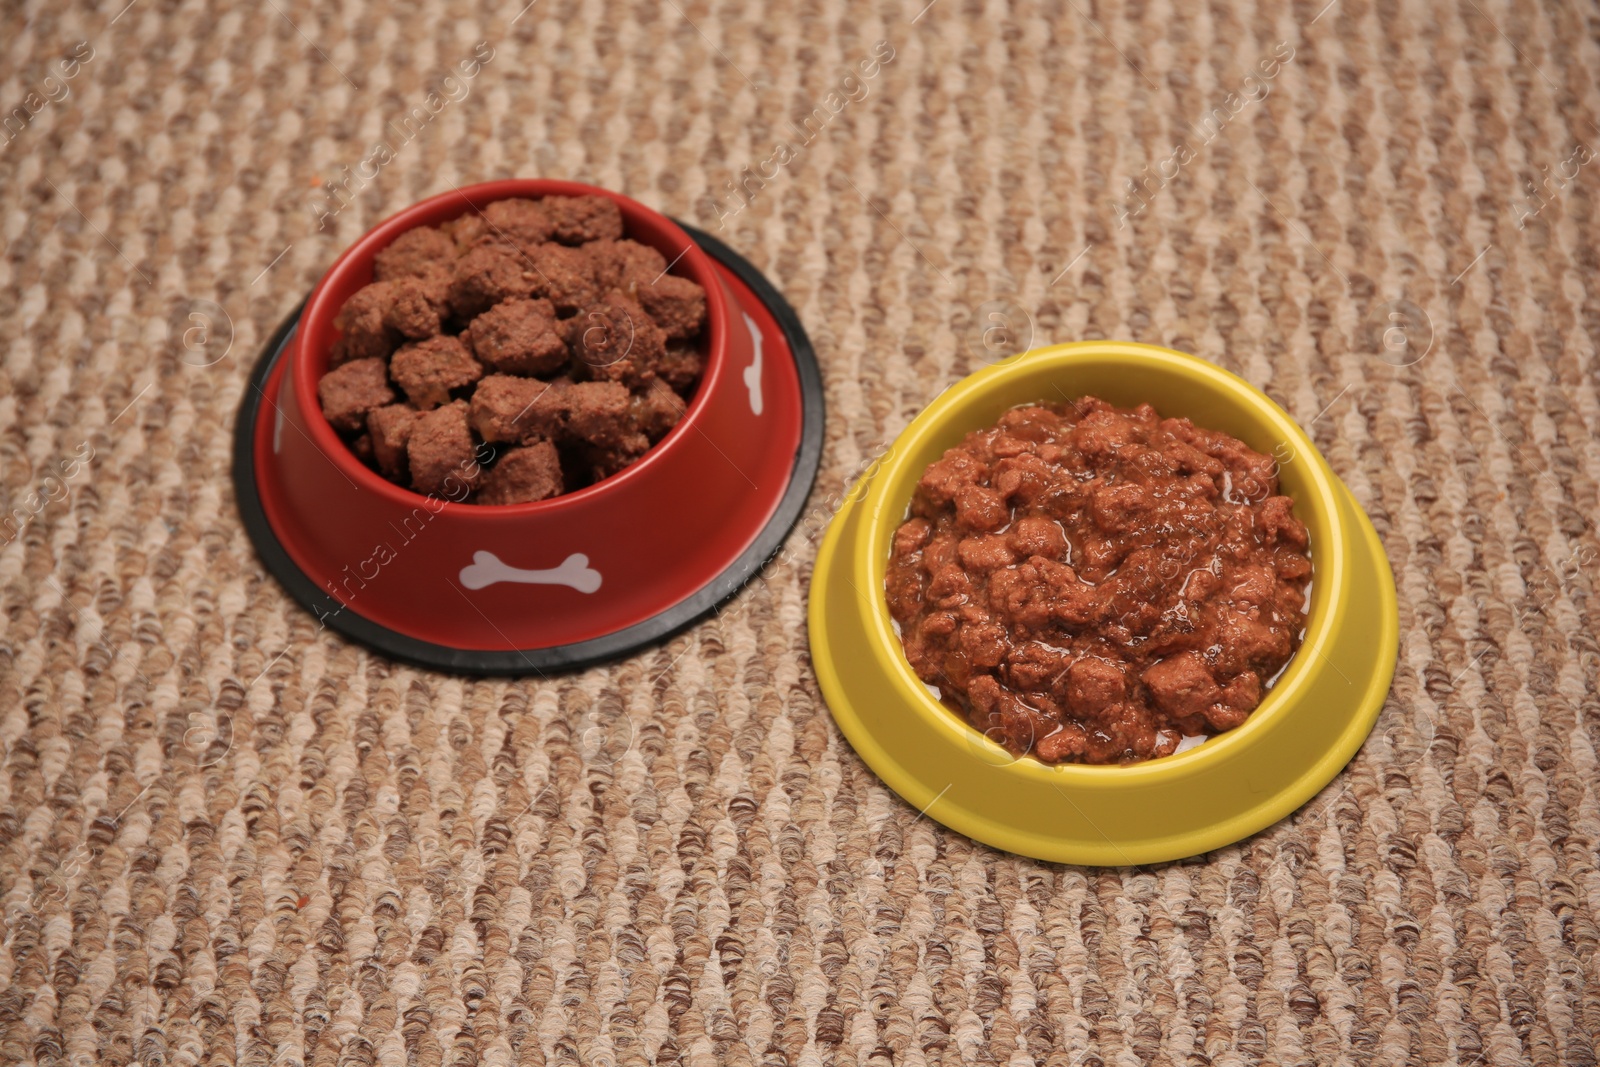 Photo of Wet pet food in feeding bowls on soft carpet, above view